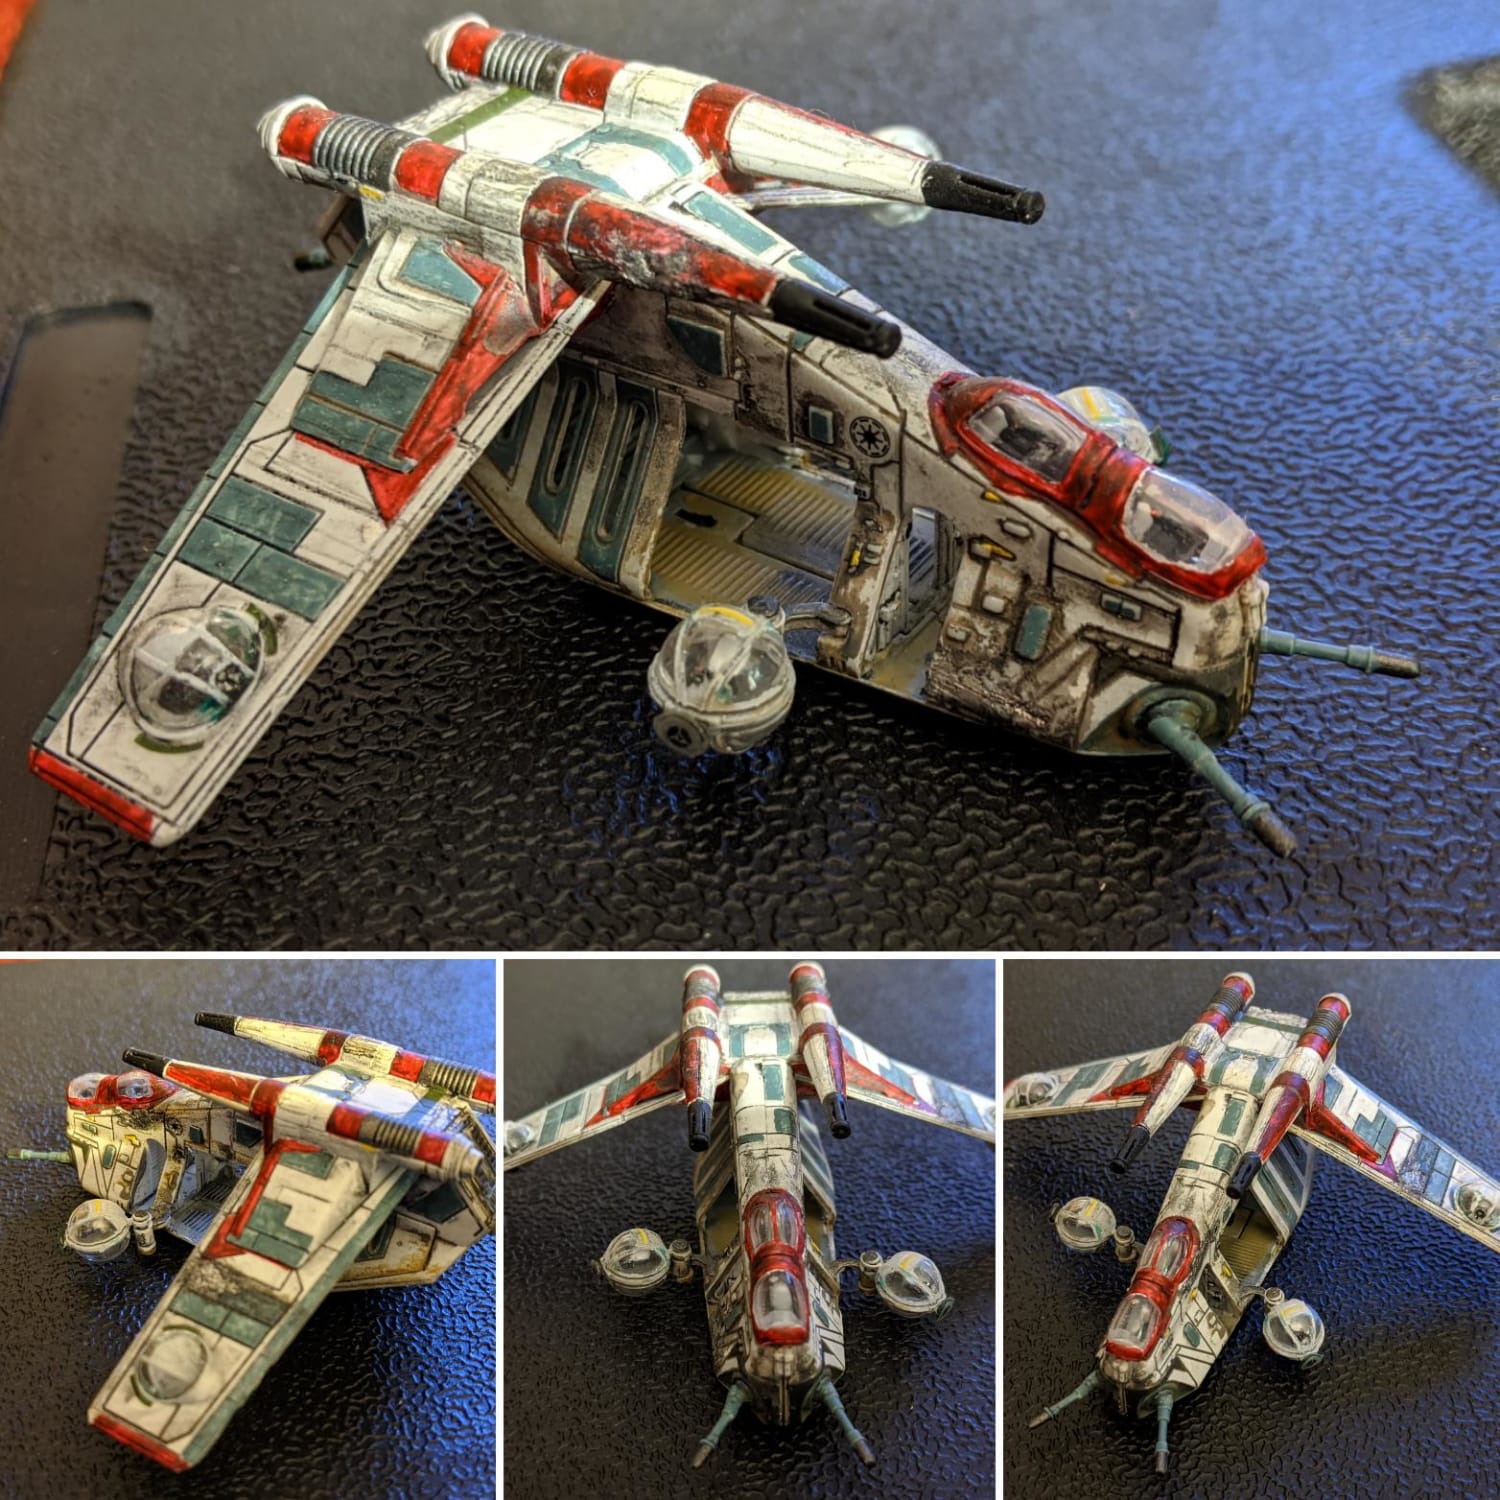 Revell 1:172 Republic Gunship. Paint faded, battered and worn from frontline service sporting some fresh chips and scorch marks. For me one of the best designs to come out of star wars and a fun quick little build. Hope you like!